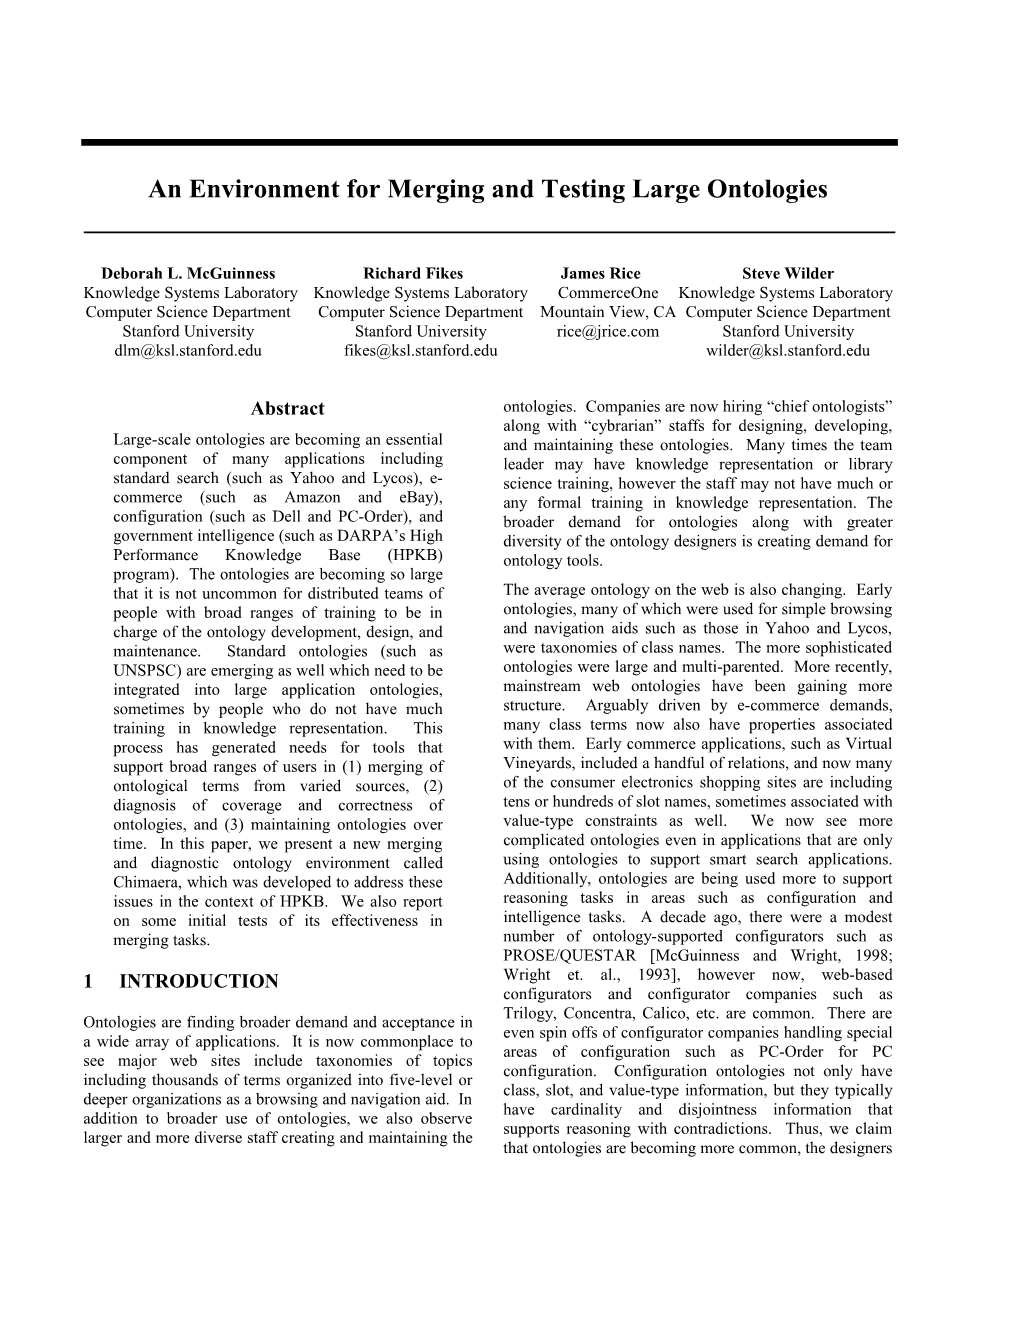 An Environment for Merging and Testing Ontologies